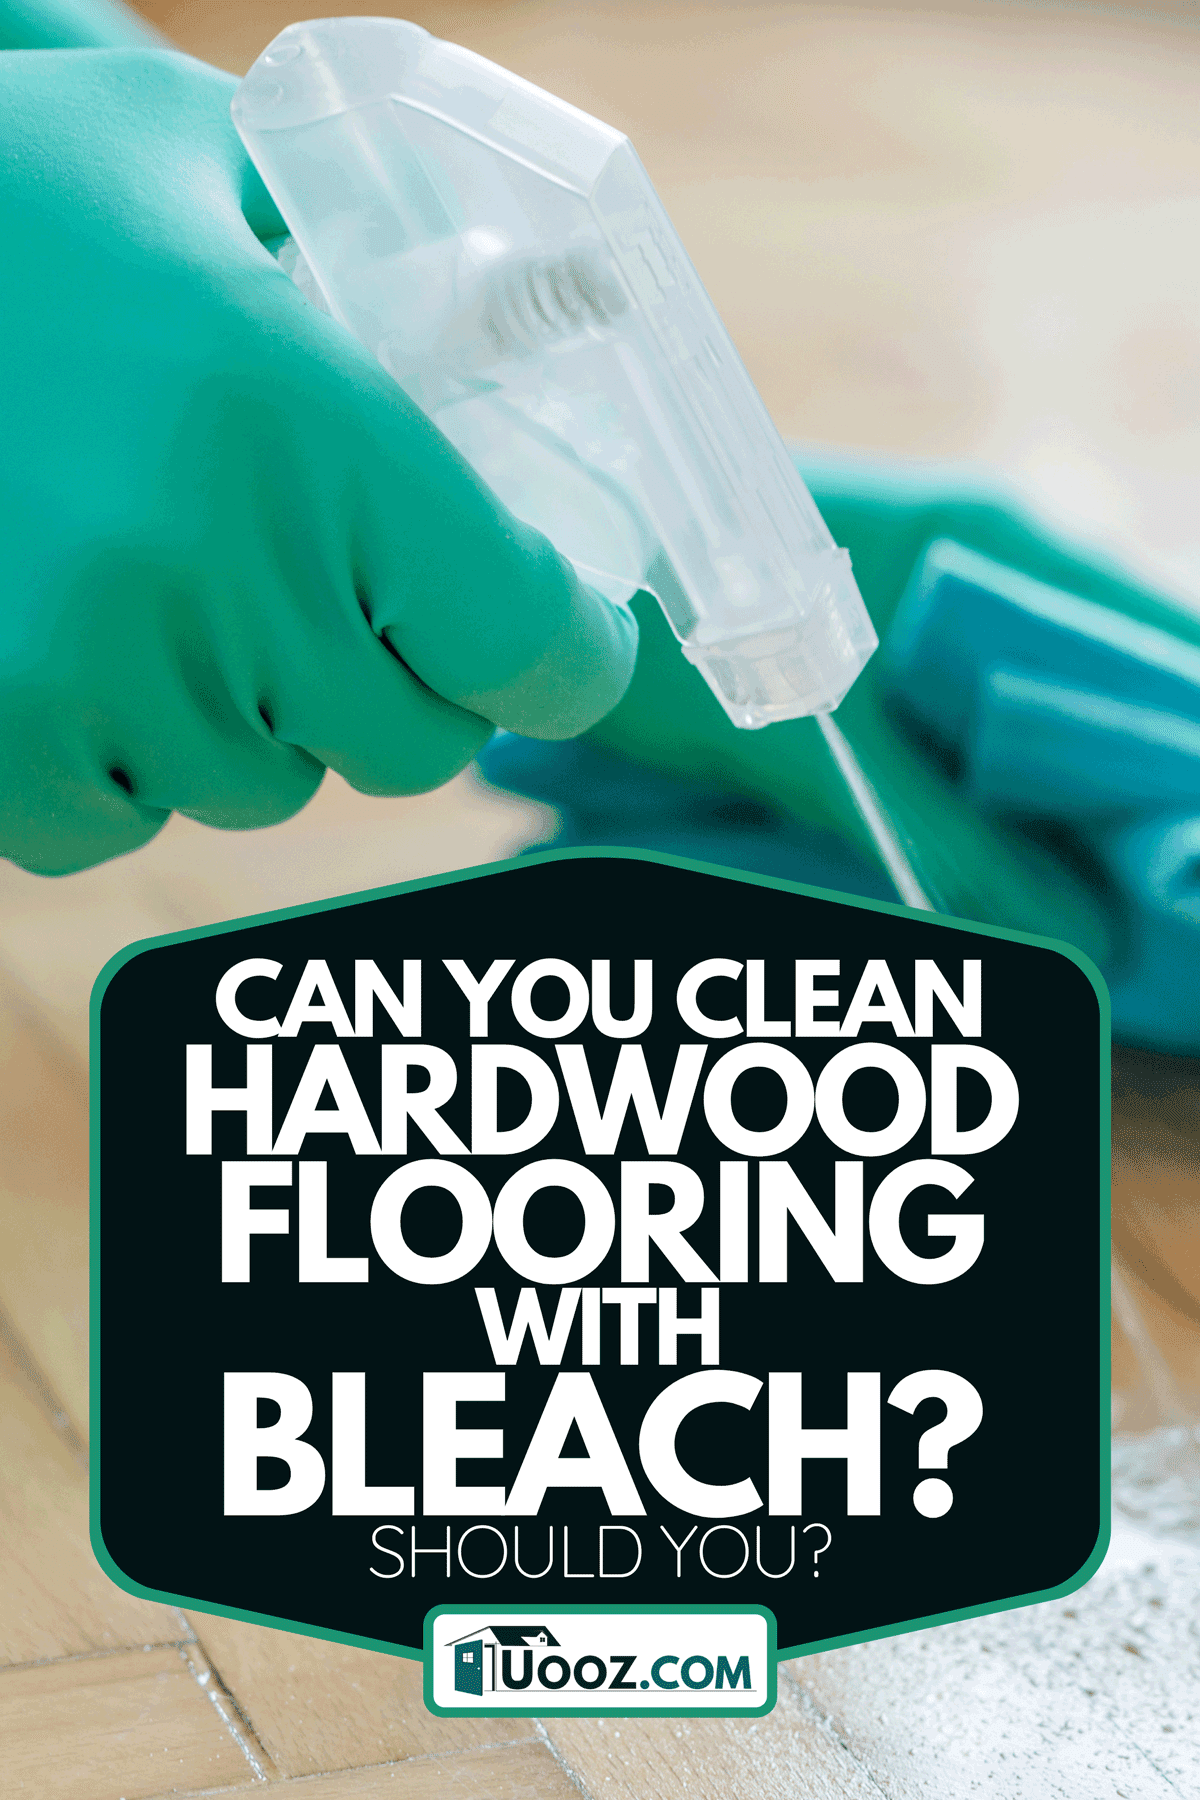 Clean Hardwood Flooring With Bleach, Cleaning Hardwood Floors With Bleach